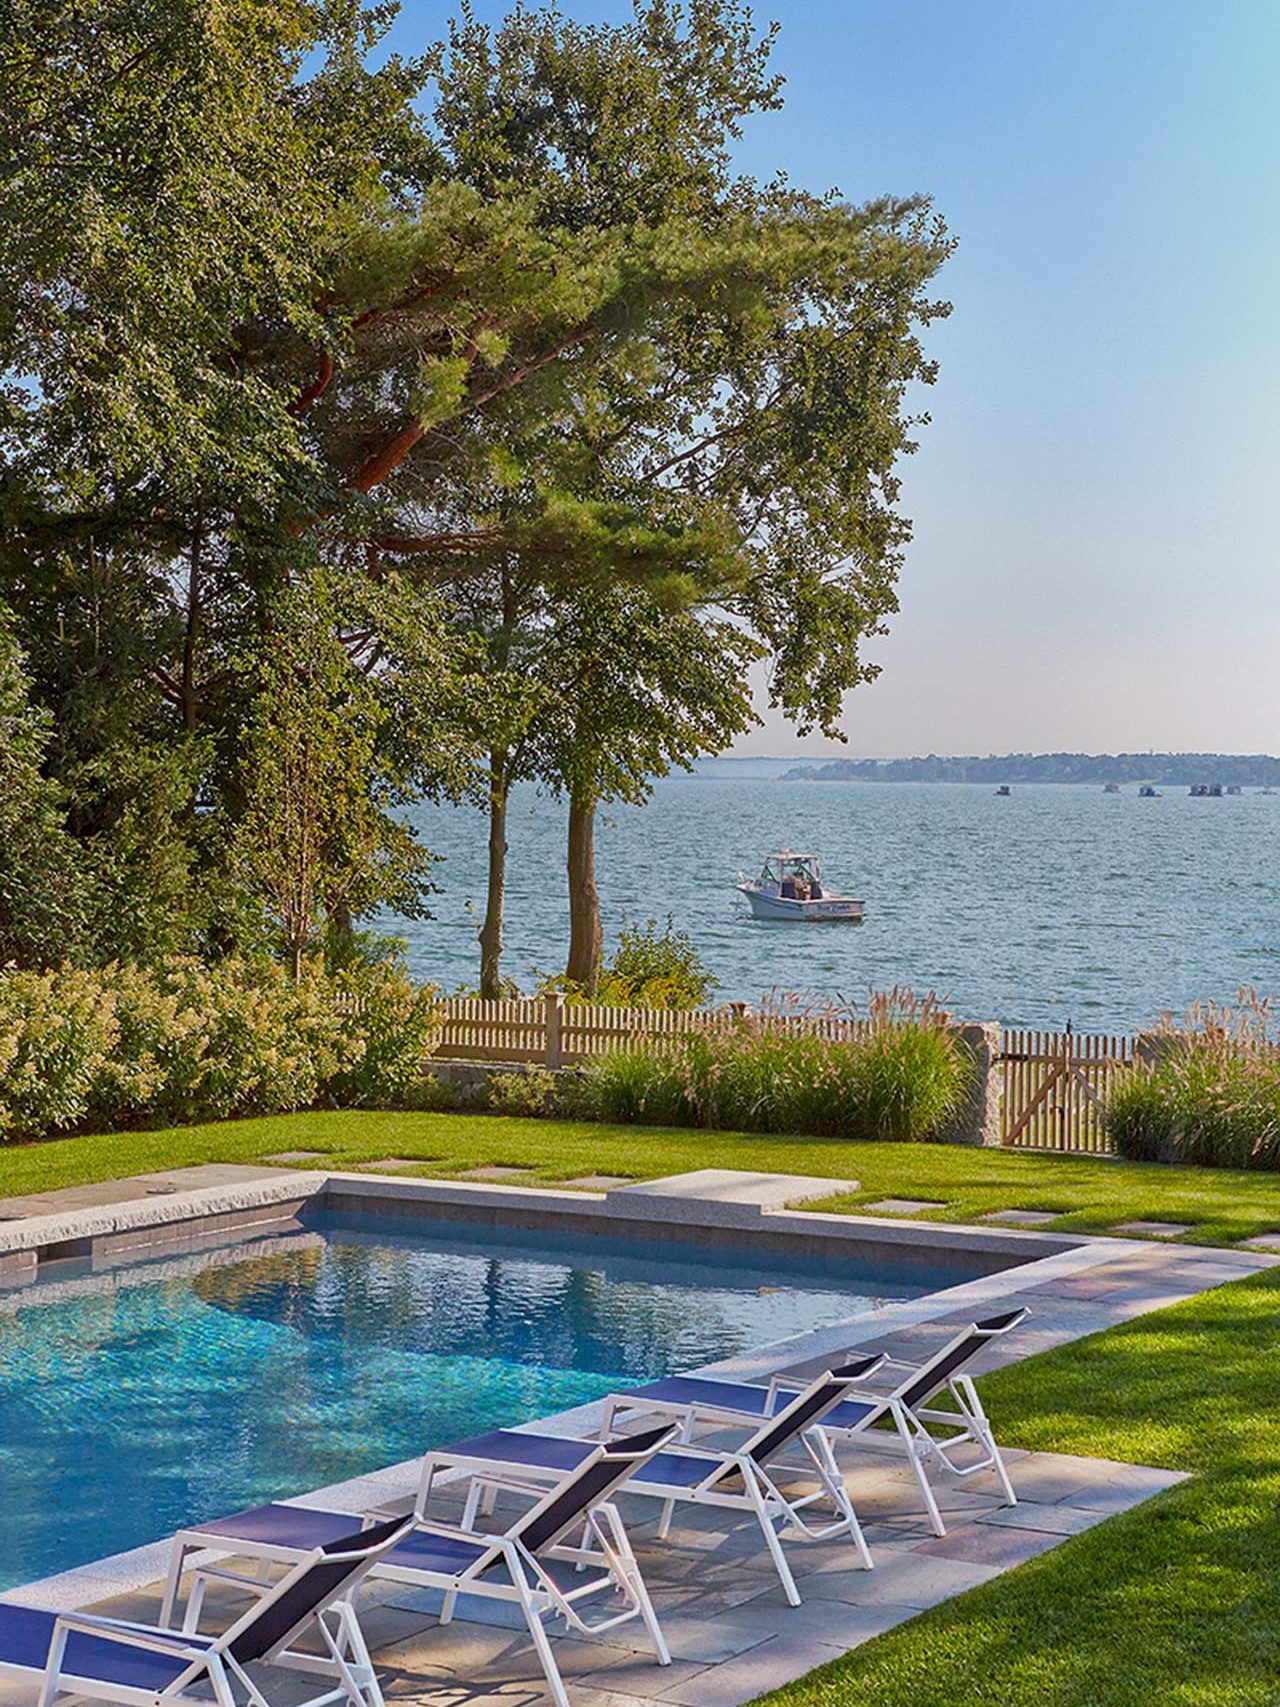 Duxbury, MA - Amazing ocean views just beyond the clean lines of the pool and landscape.